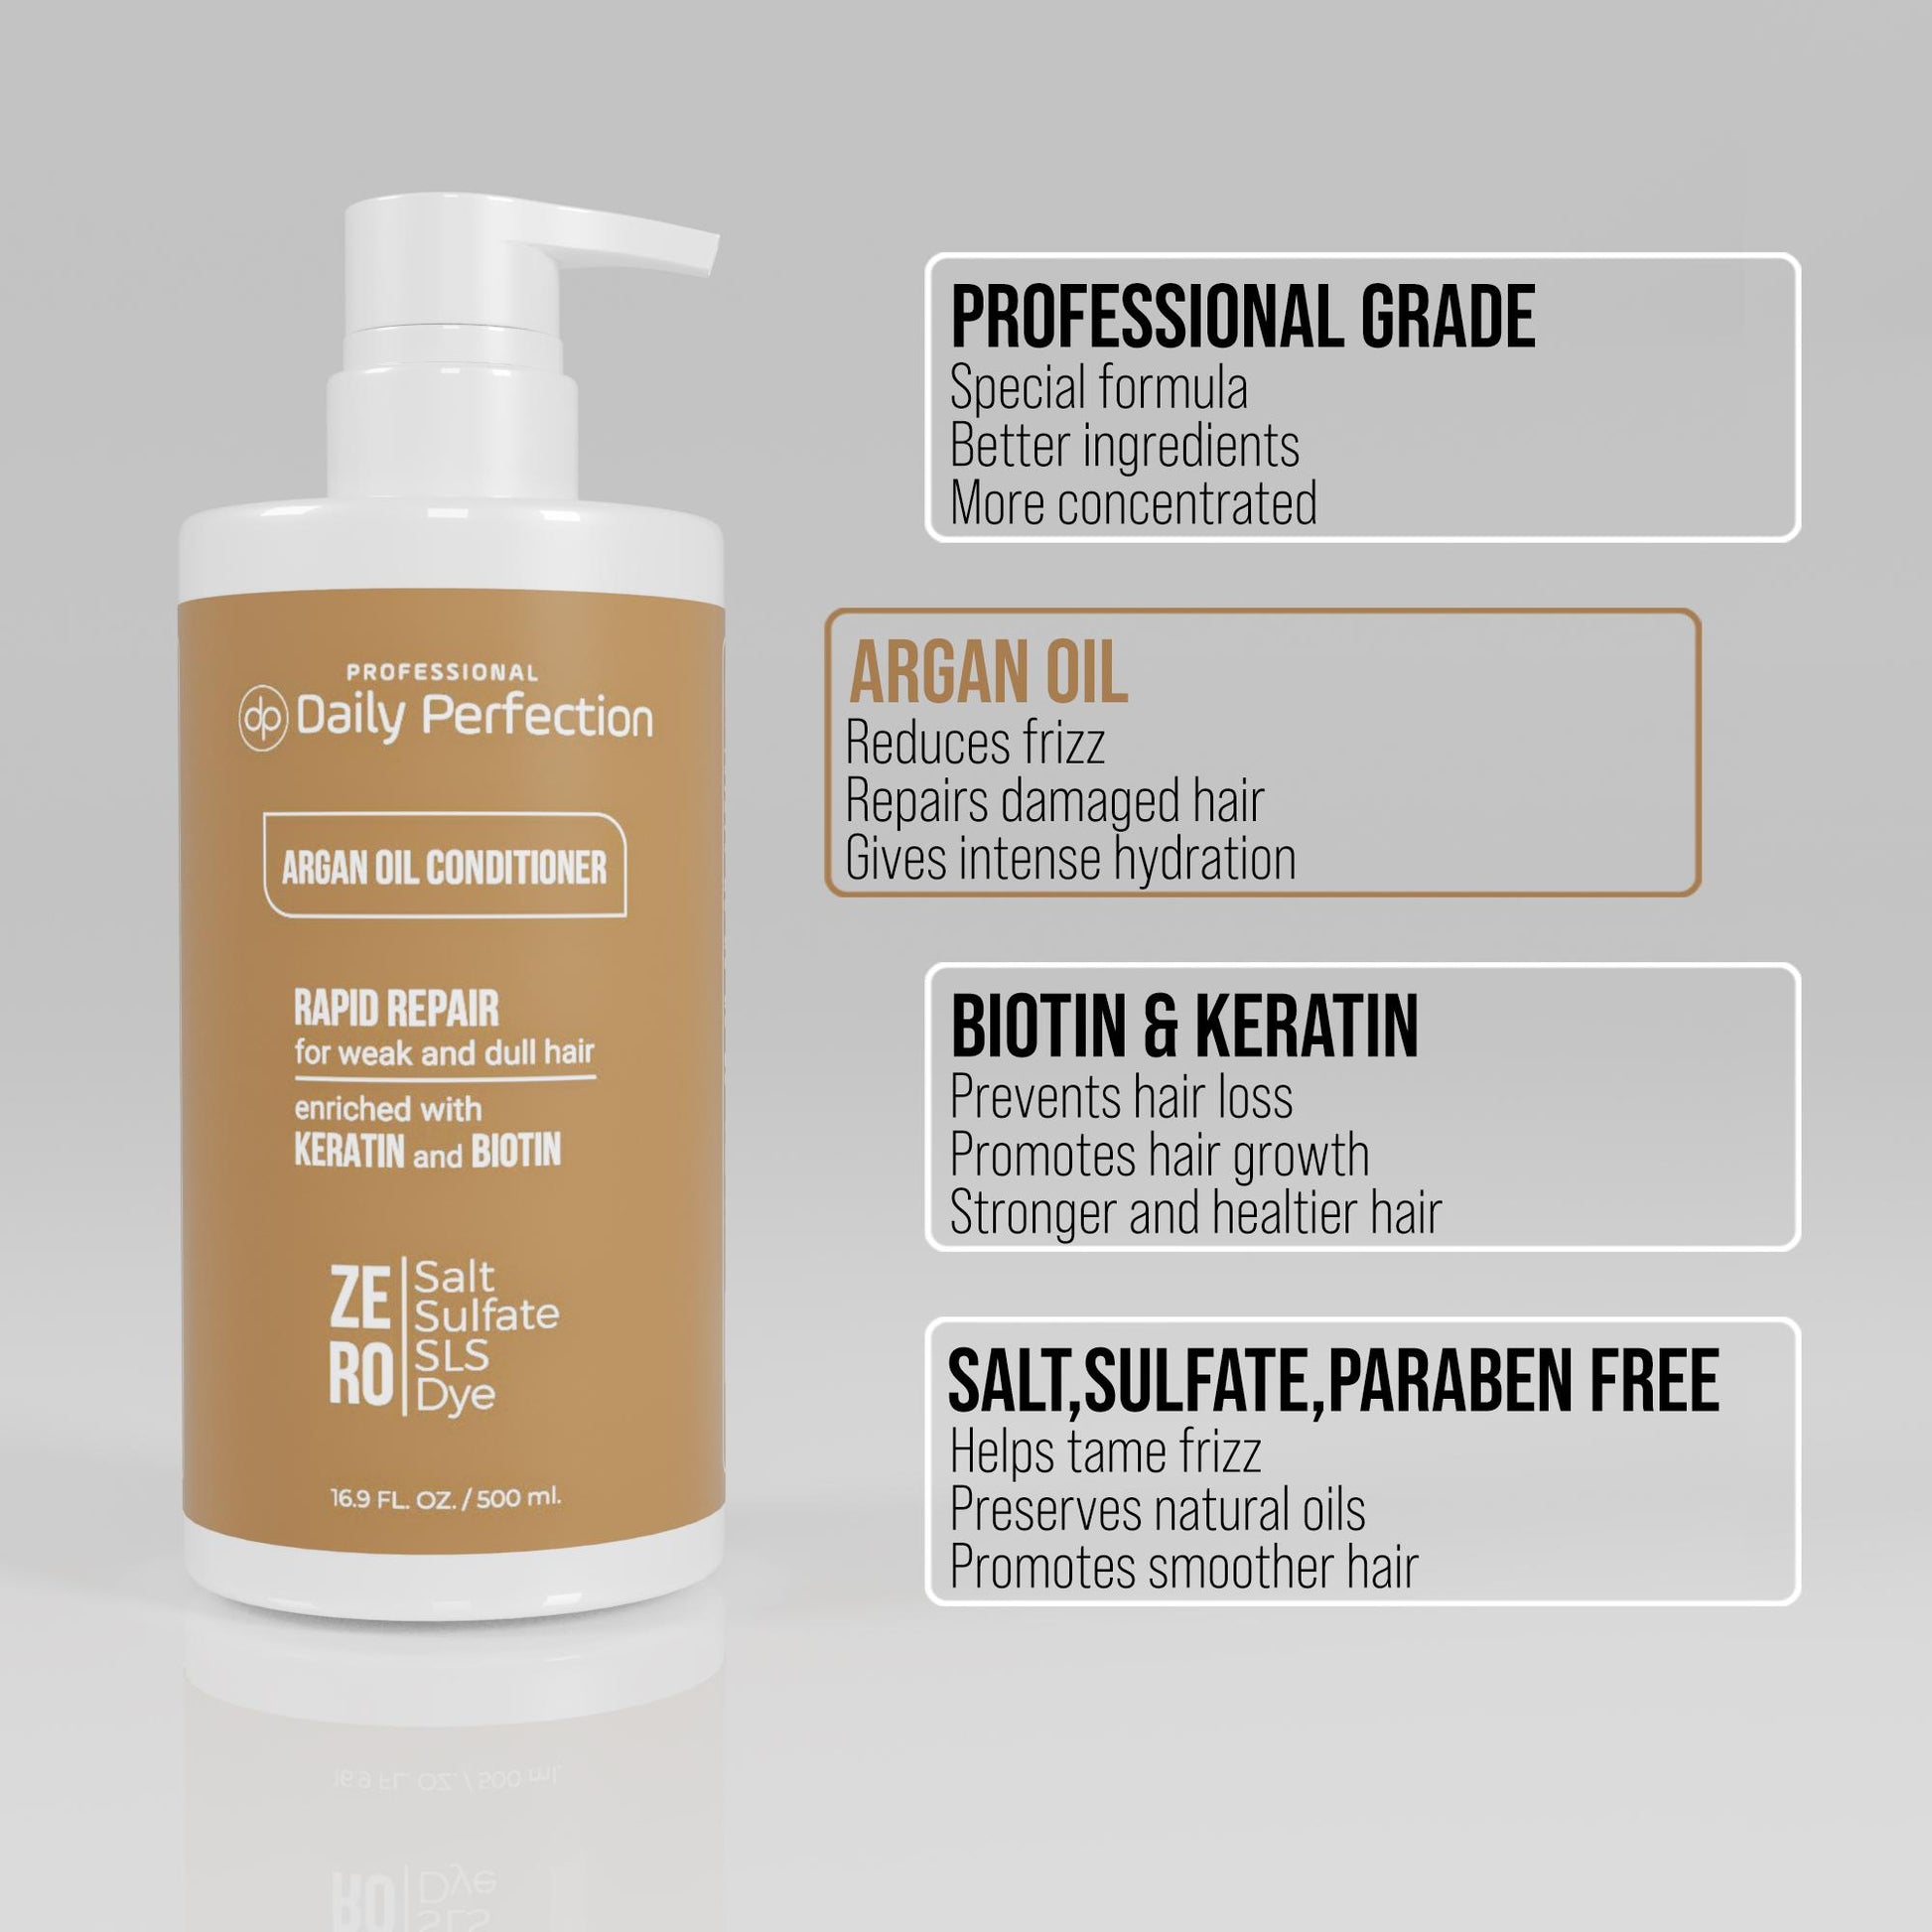 infographic explains the product benefits in four bullet points for Daily Perfection Argan Oil Conditioner